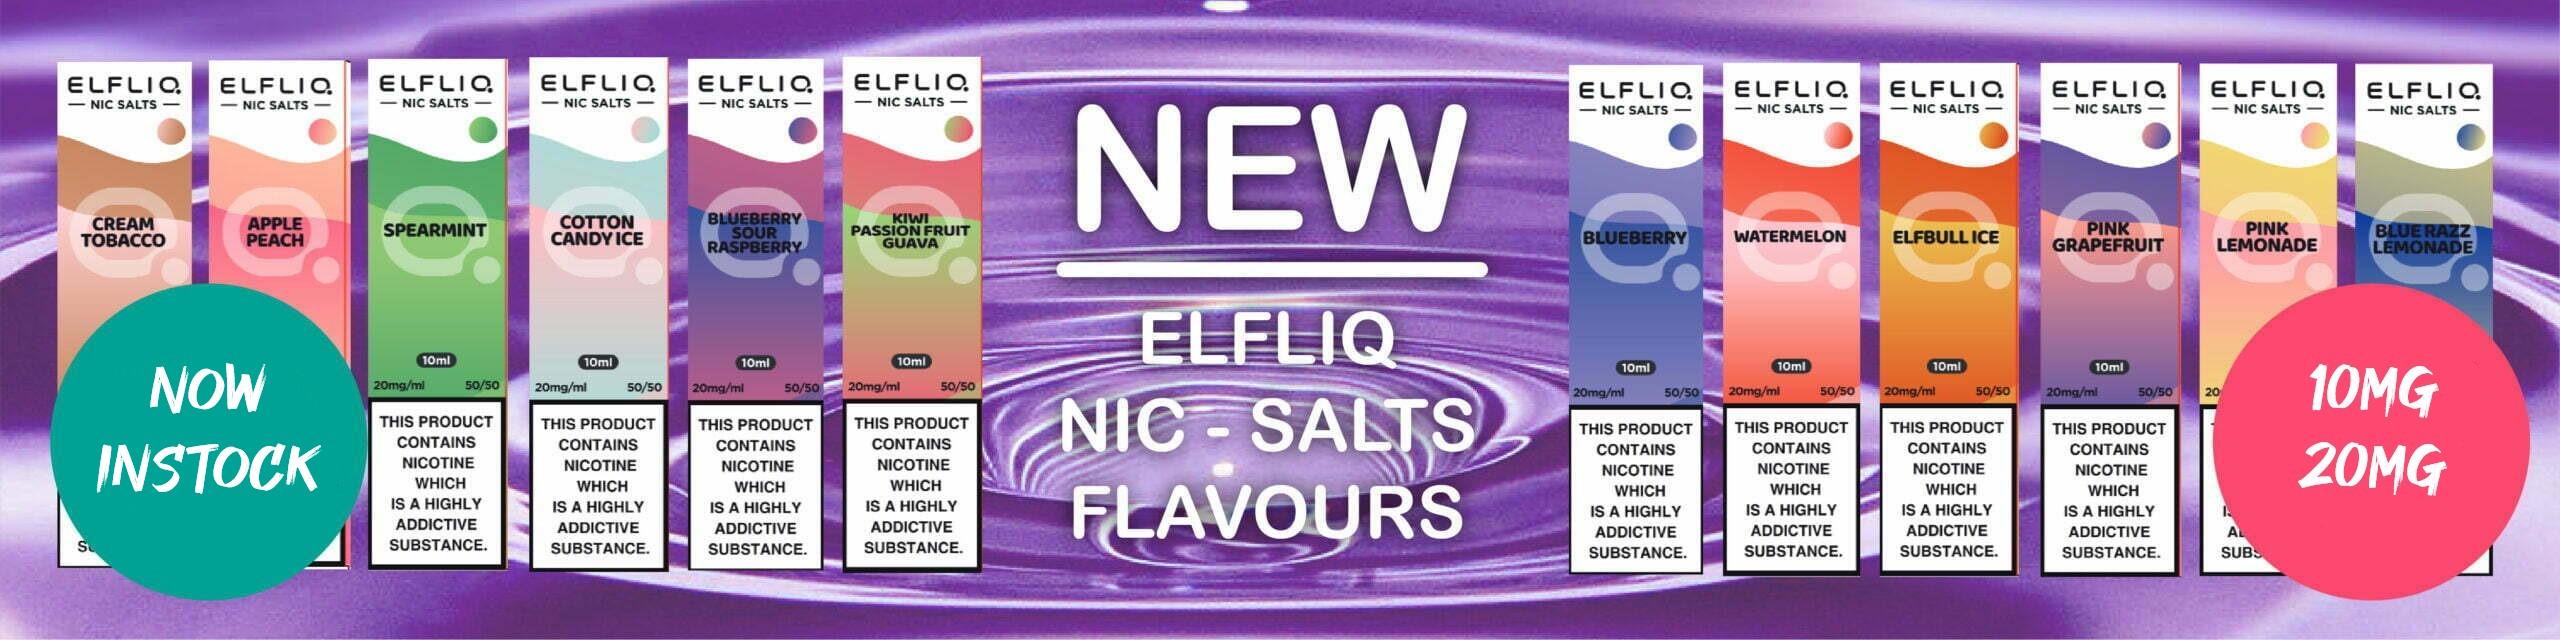 5 New Flavours Added